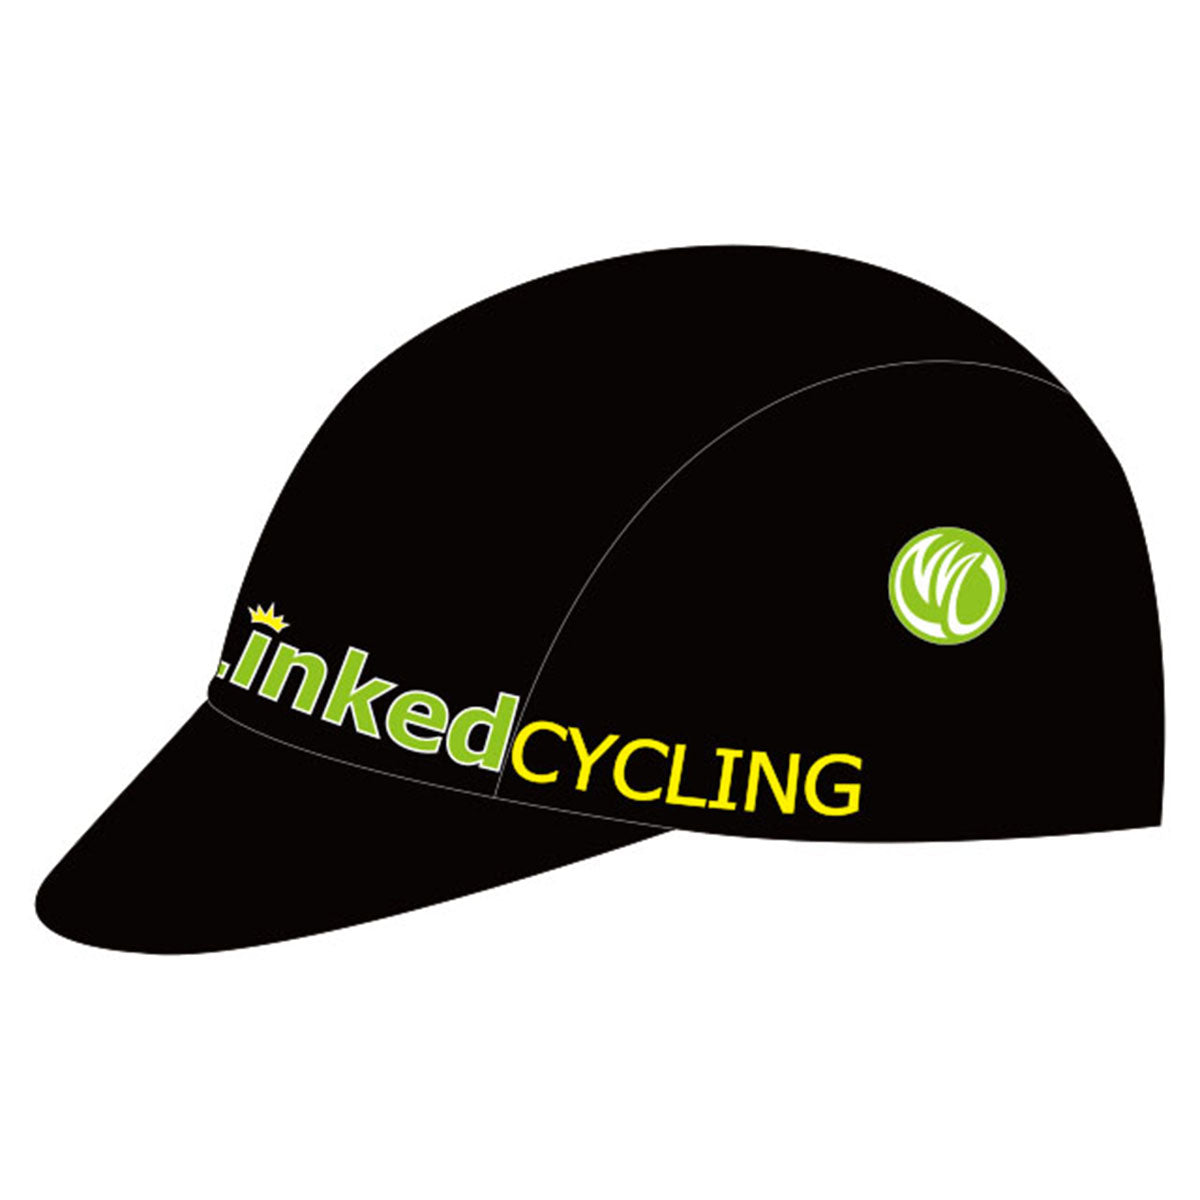 Linked Cycling Bronze Cycling Cap, FREE SIZE